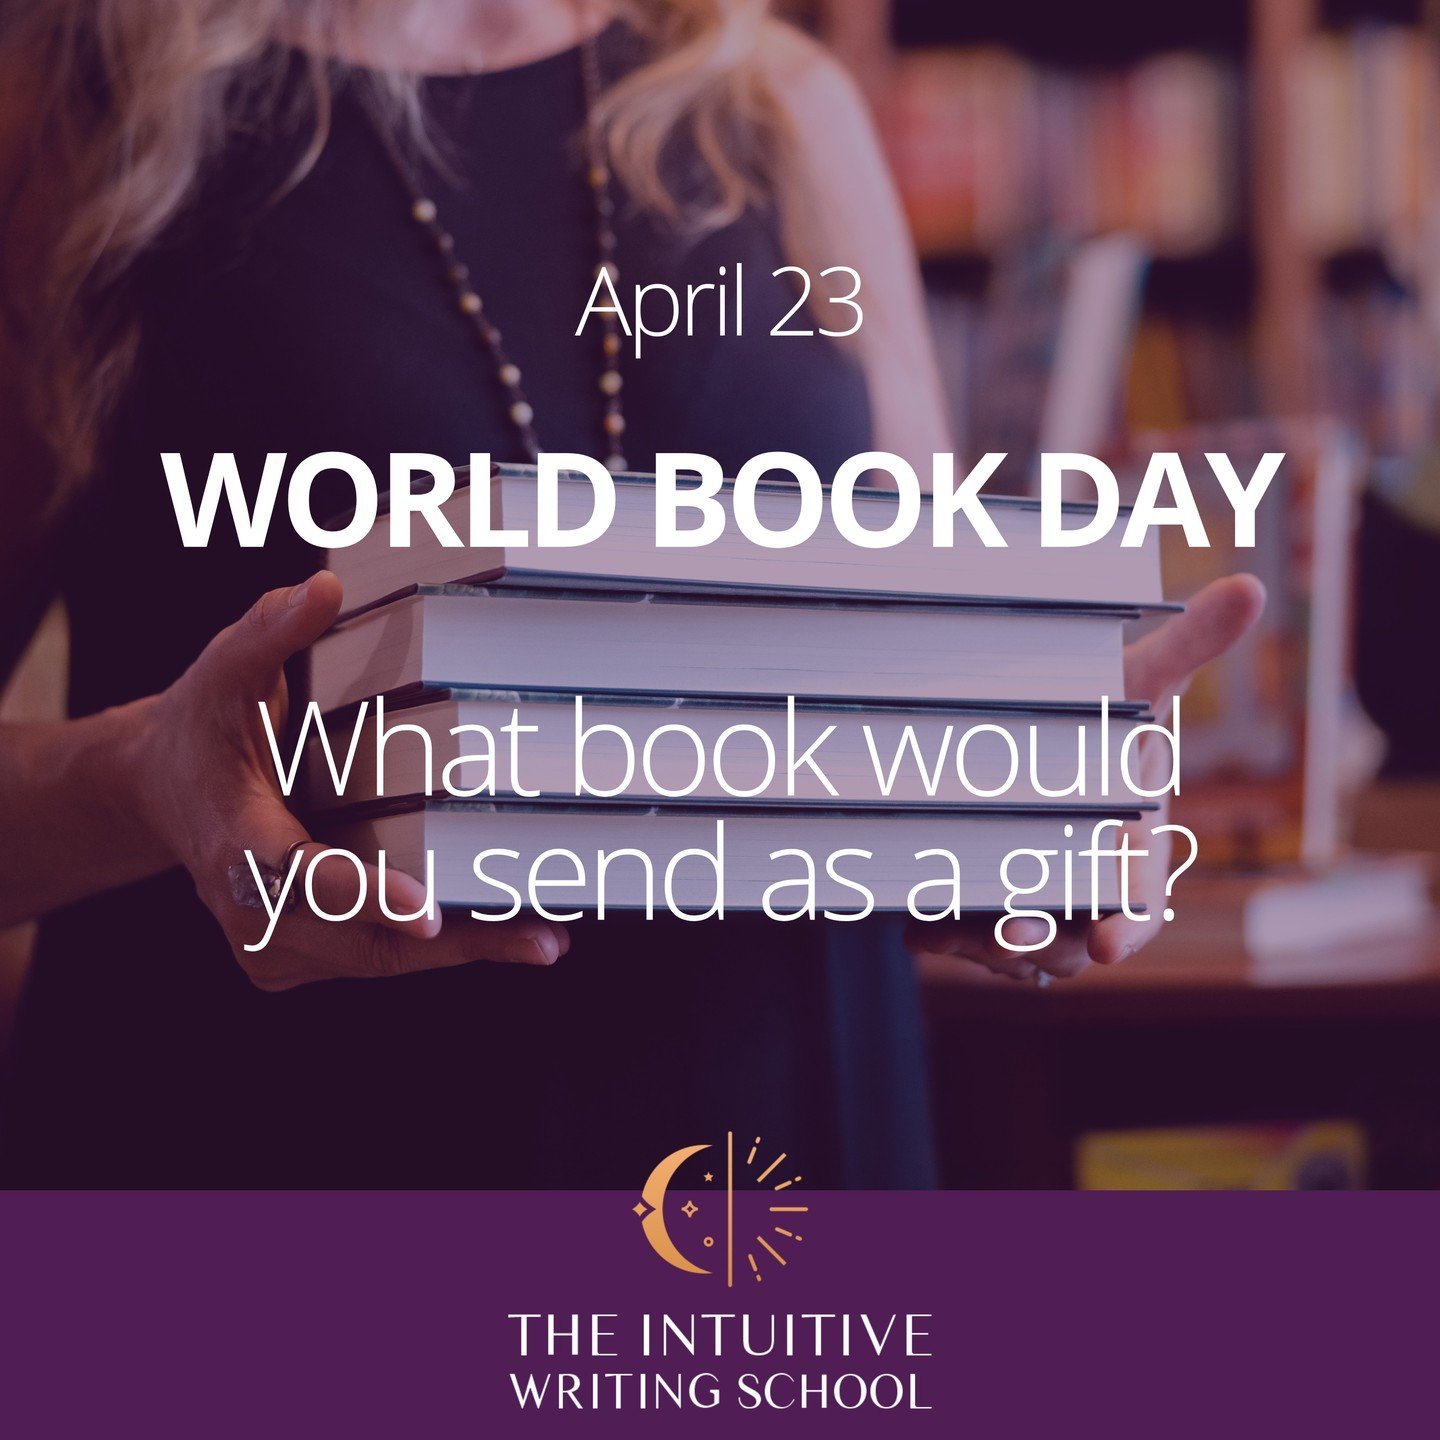 It's World Book Day!

What book do you love so much you'd send it as a gift?

#booksbooksbooks #authorcommunity #ilovebooks #ilovebooks📚 #booklover #ilovereading #authors #books #bookstragam #bookstagrammer